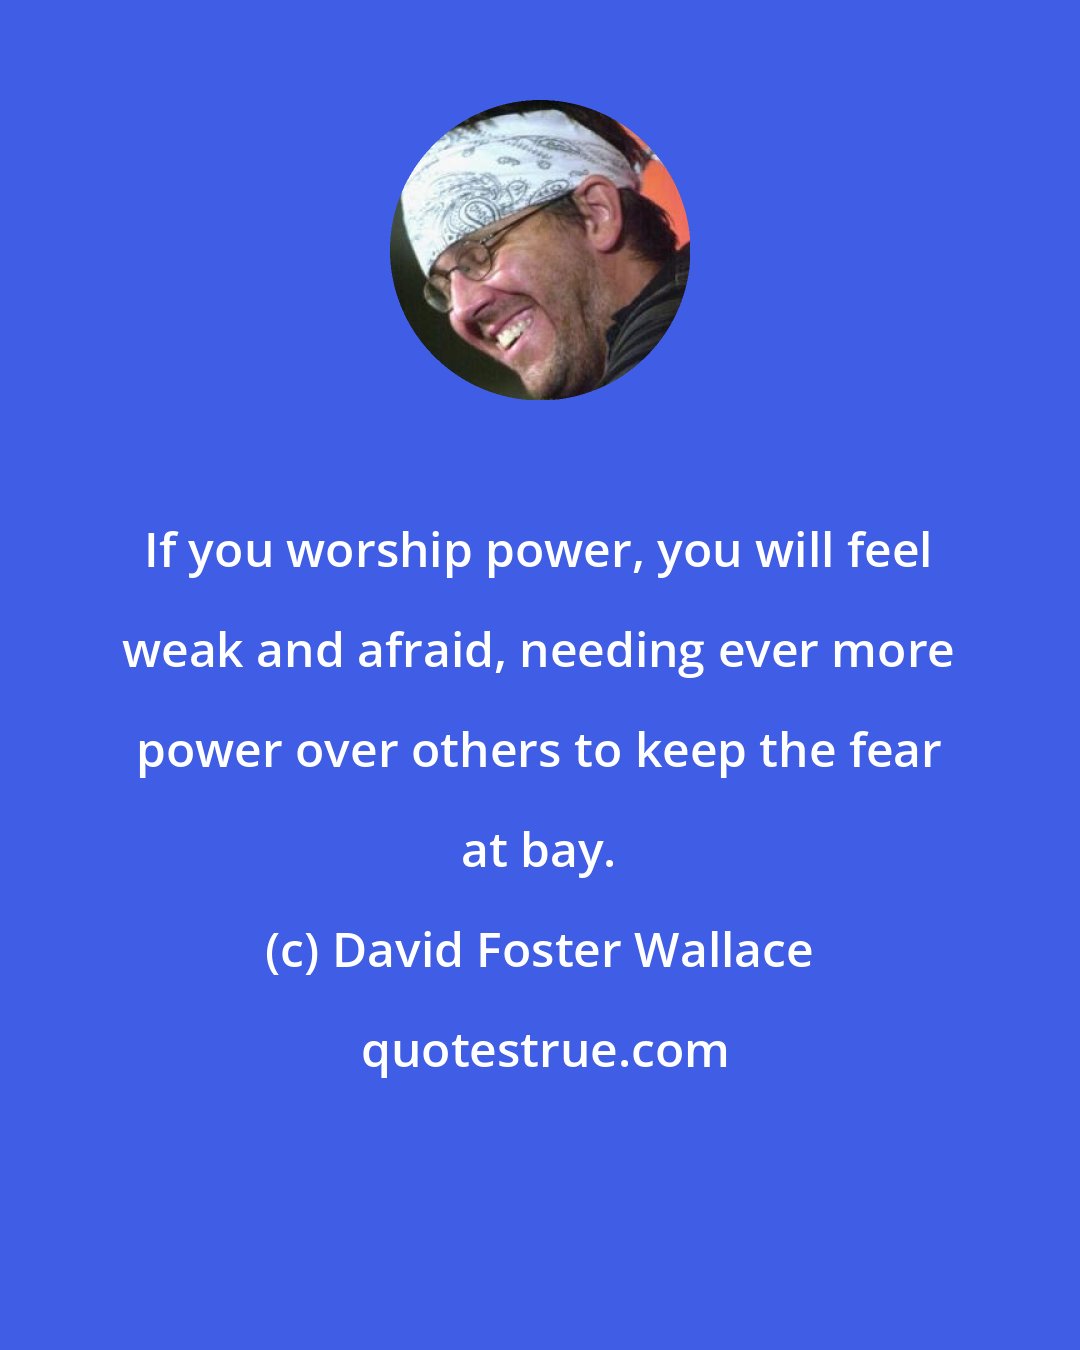 David Foster Wallace: If you worship power, you will feel weak and afraid, needing ever more power over others to keep the fear at bay.